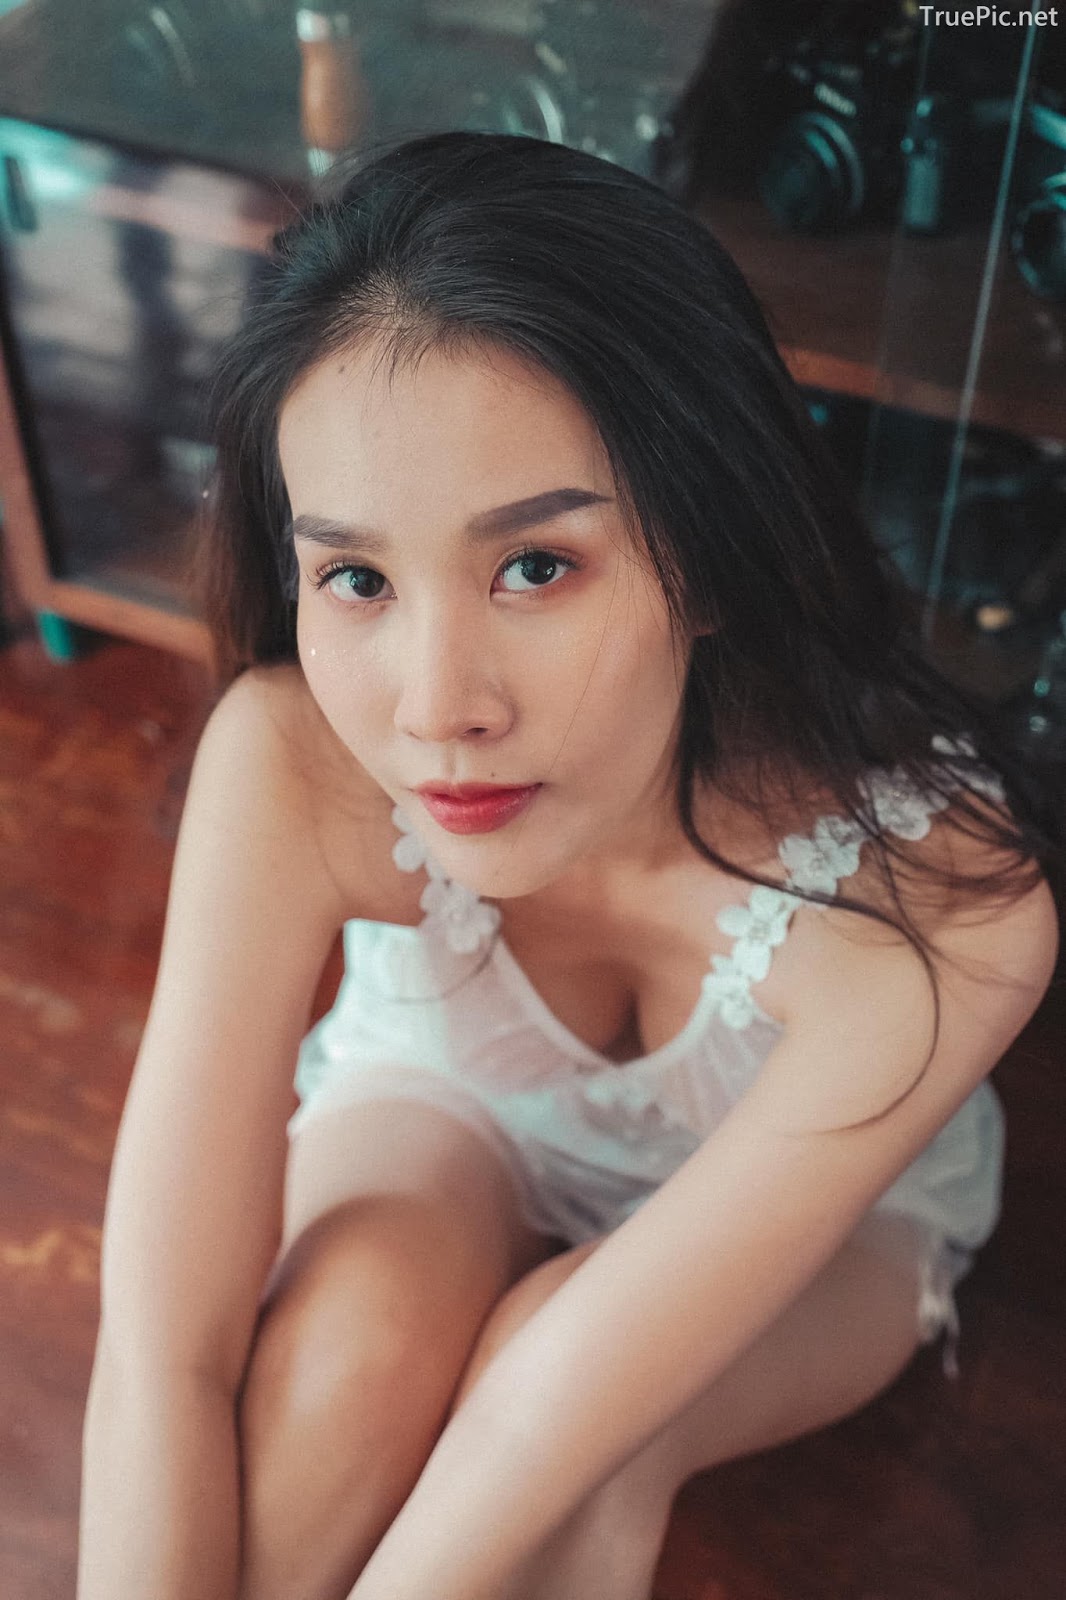 Thailand model - Ssomch Tanass - Sexy in Transparent Ultra-thin Lingerie - TruePic.net - Picture 6